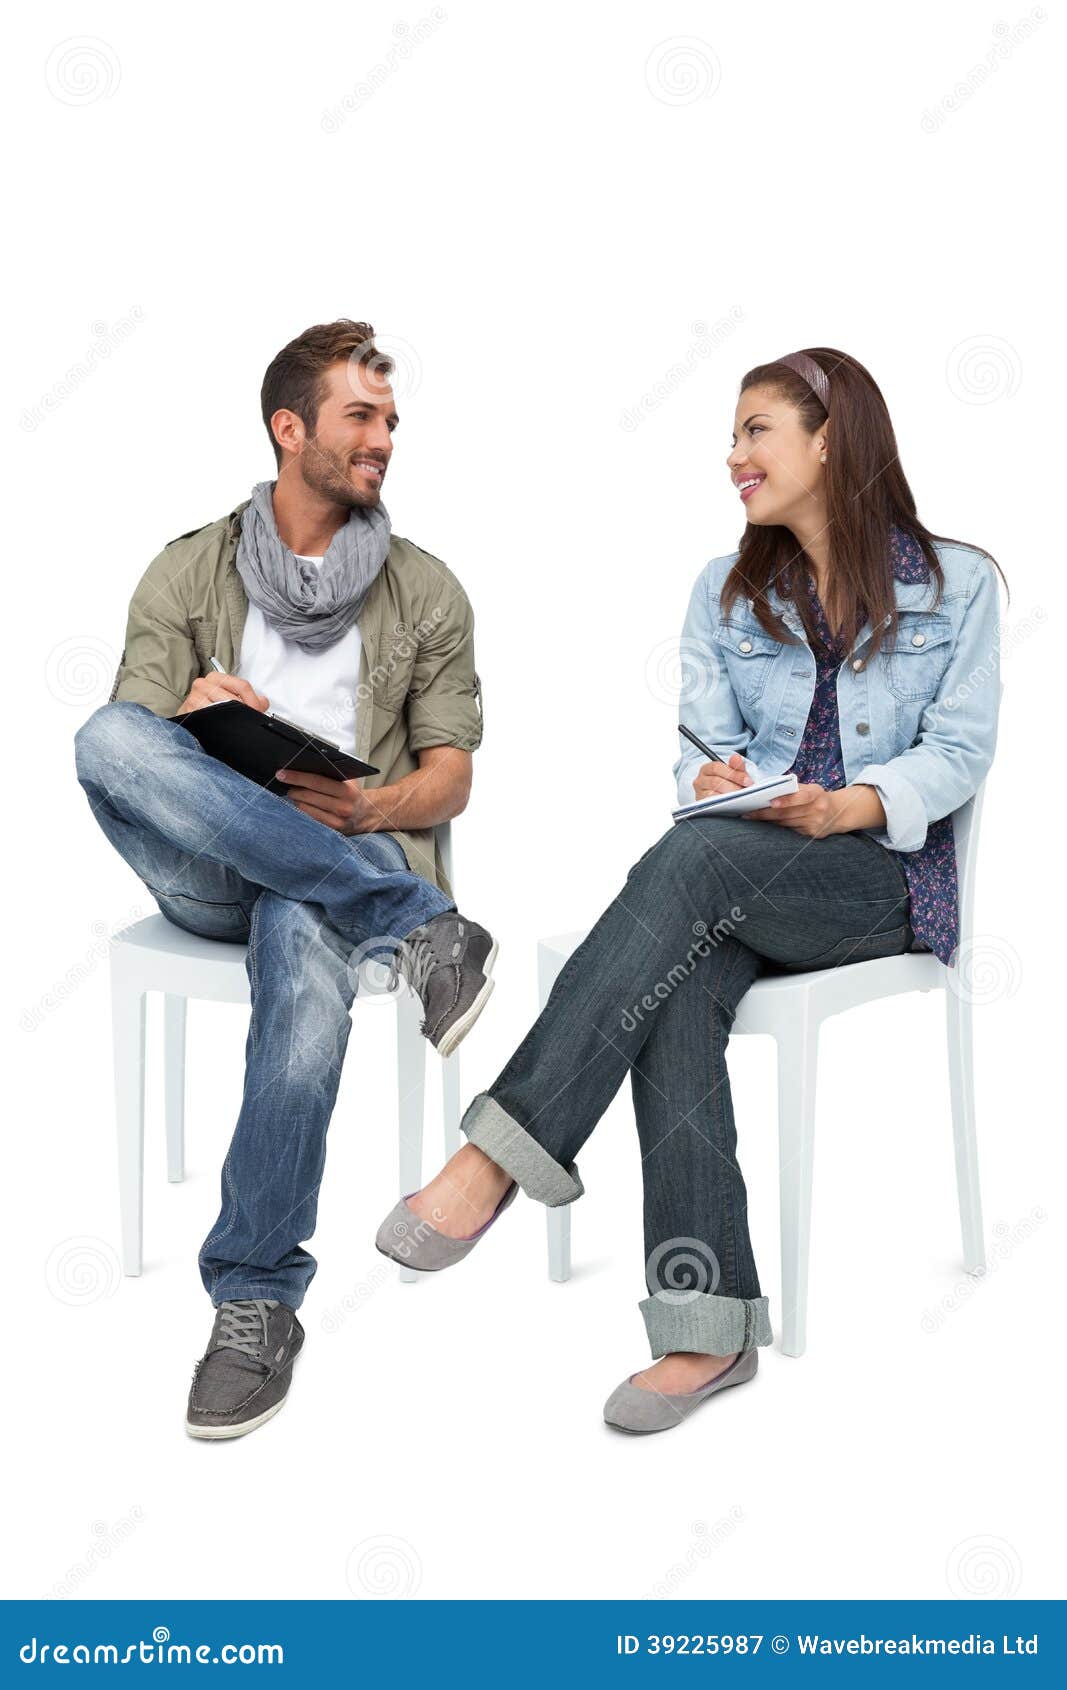 Cool Young Couple Writing in Notepads Stock Image - Image of attractive ...